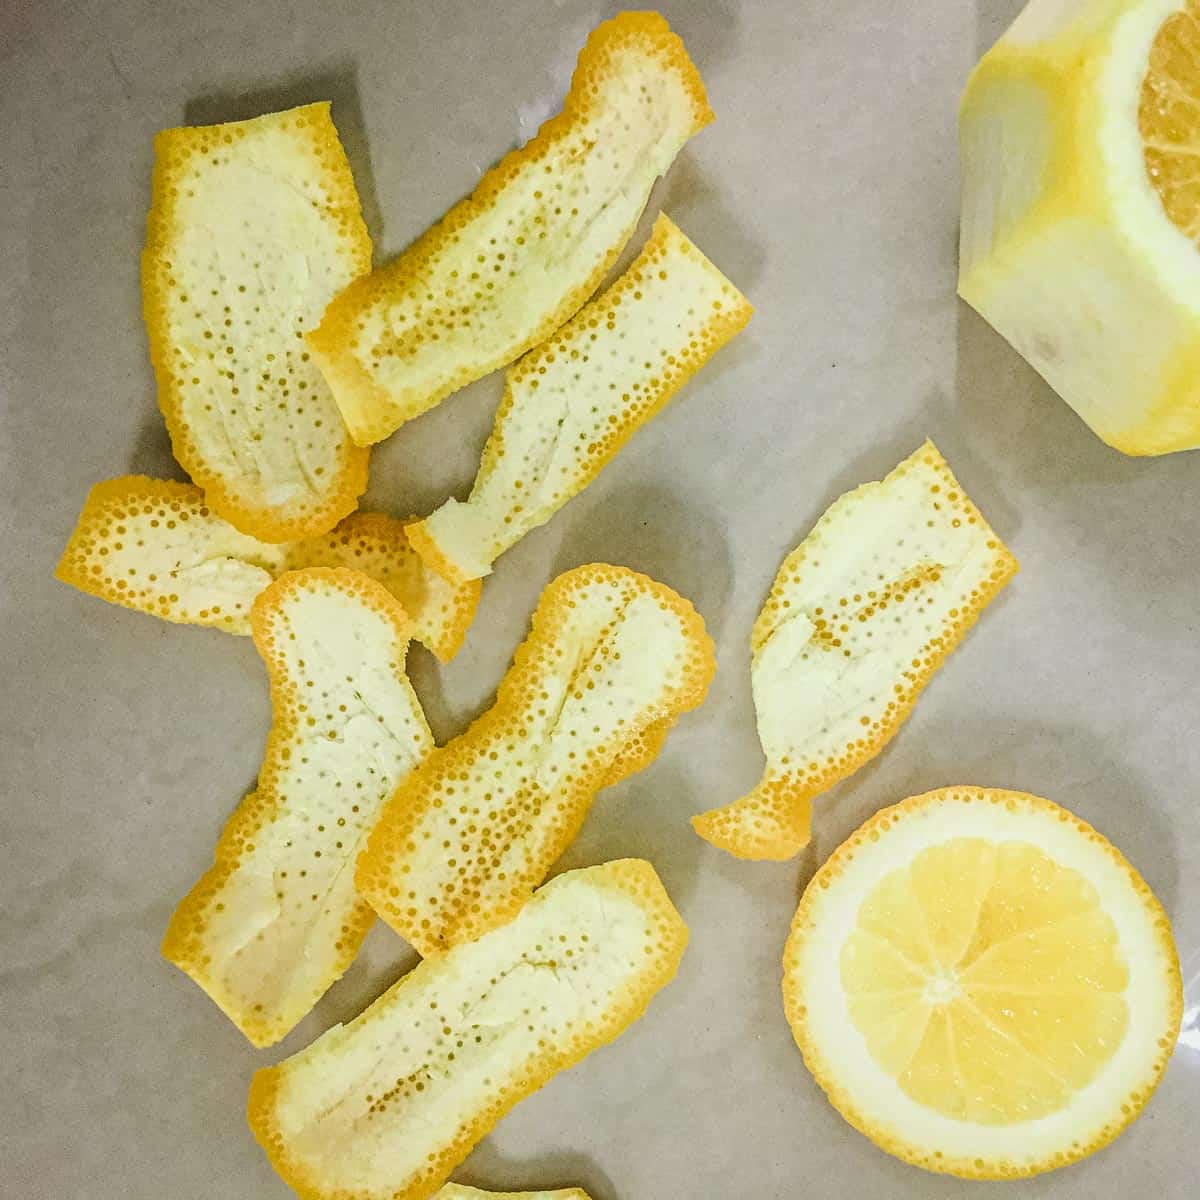 Slices of orange skin with the white pith removed